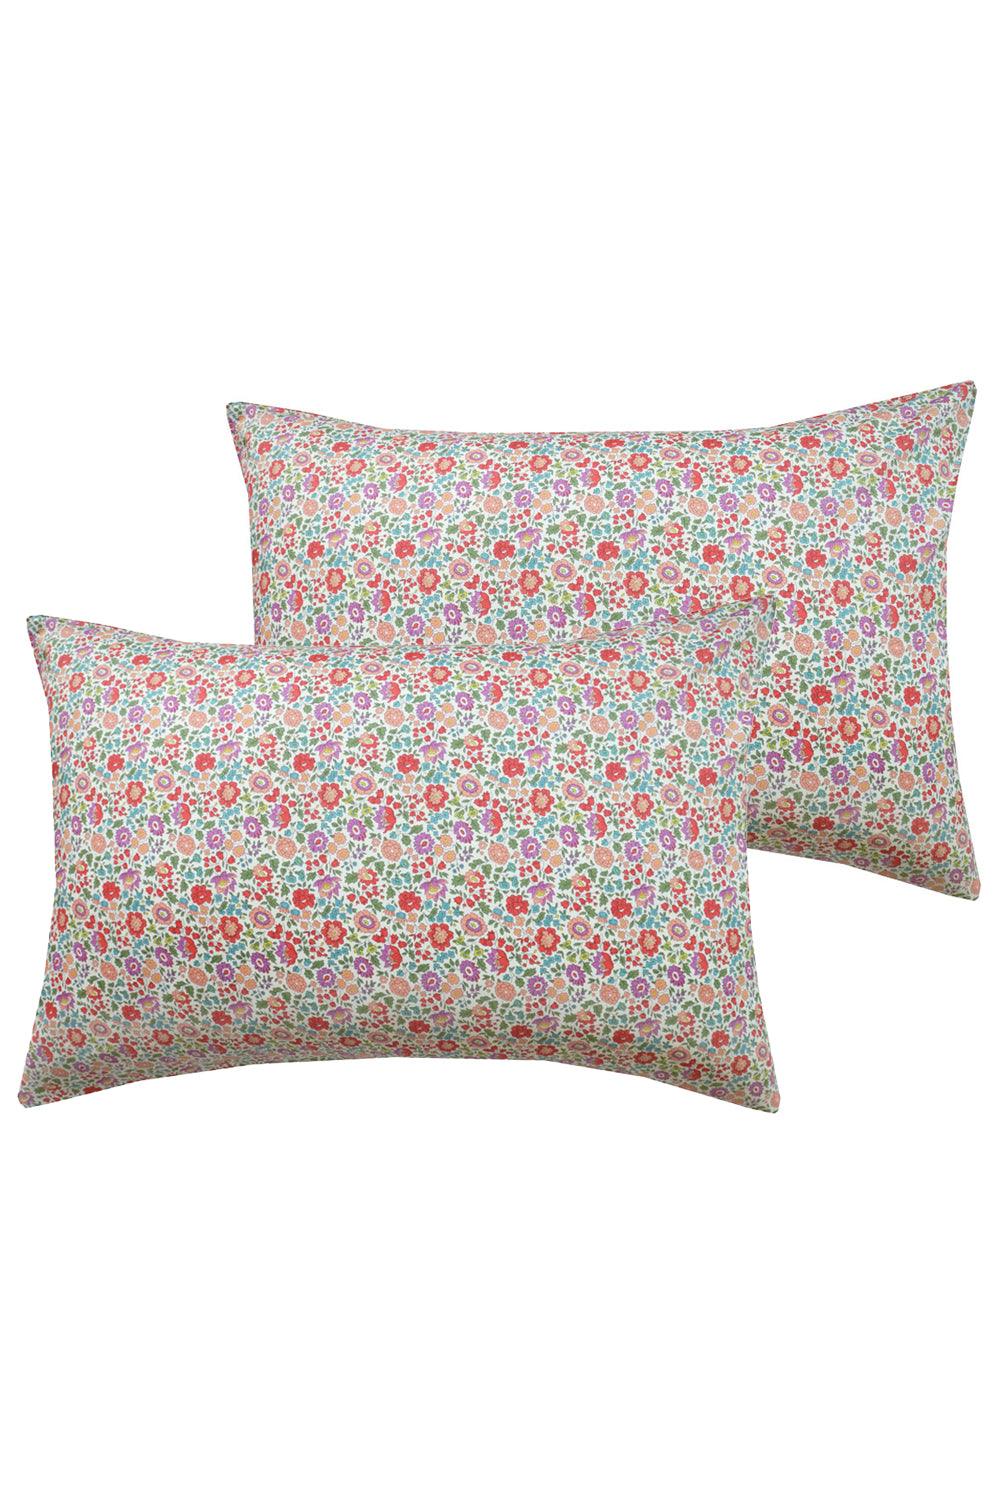 Pillowcase made with Liberty Fabric D'ANJO PEACH - Coco & Wolf